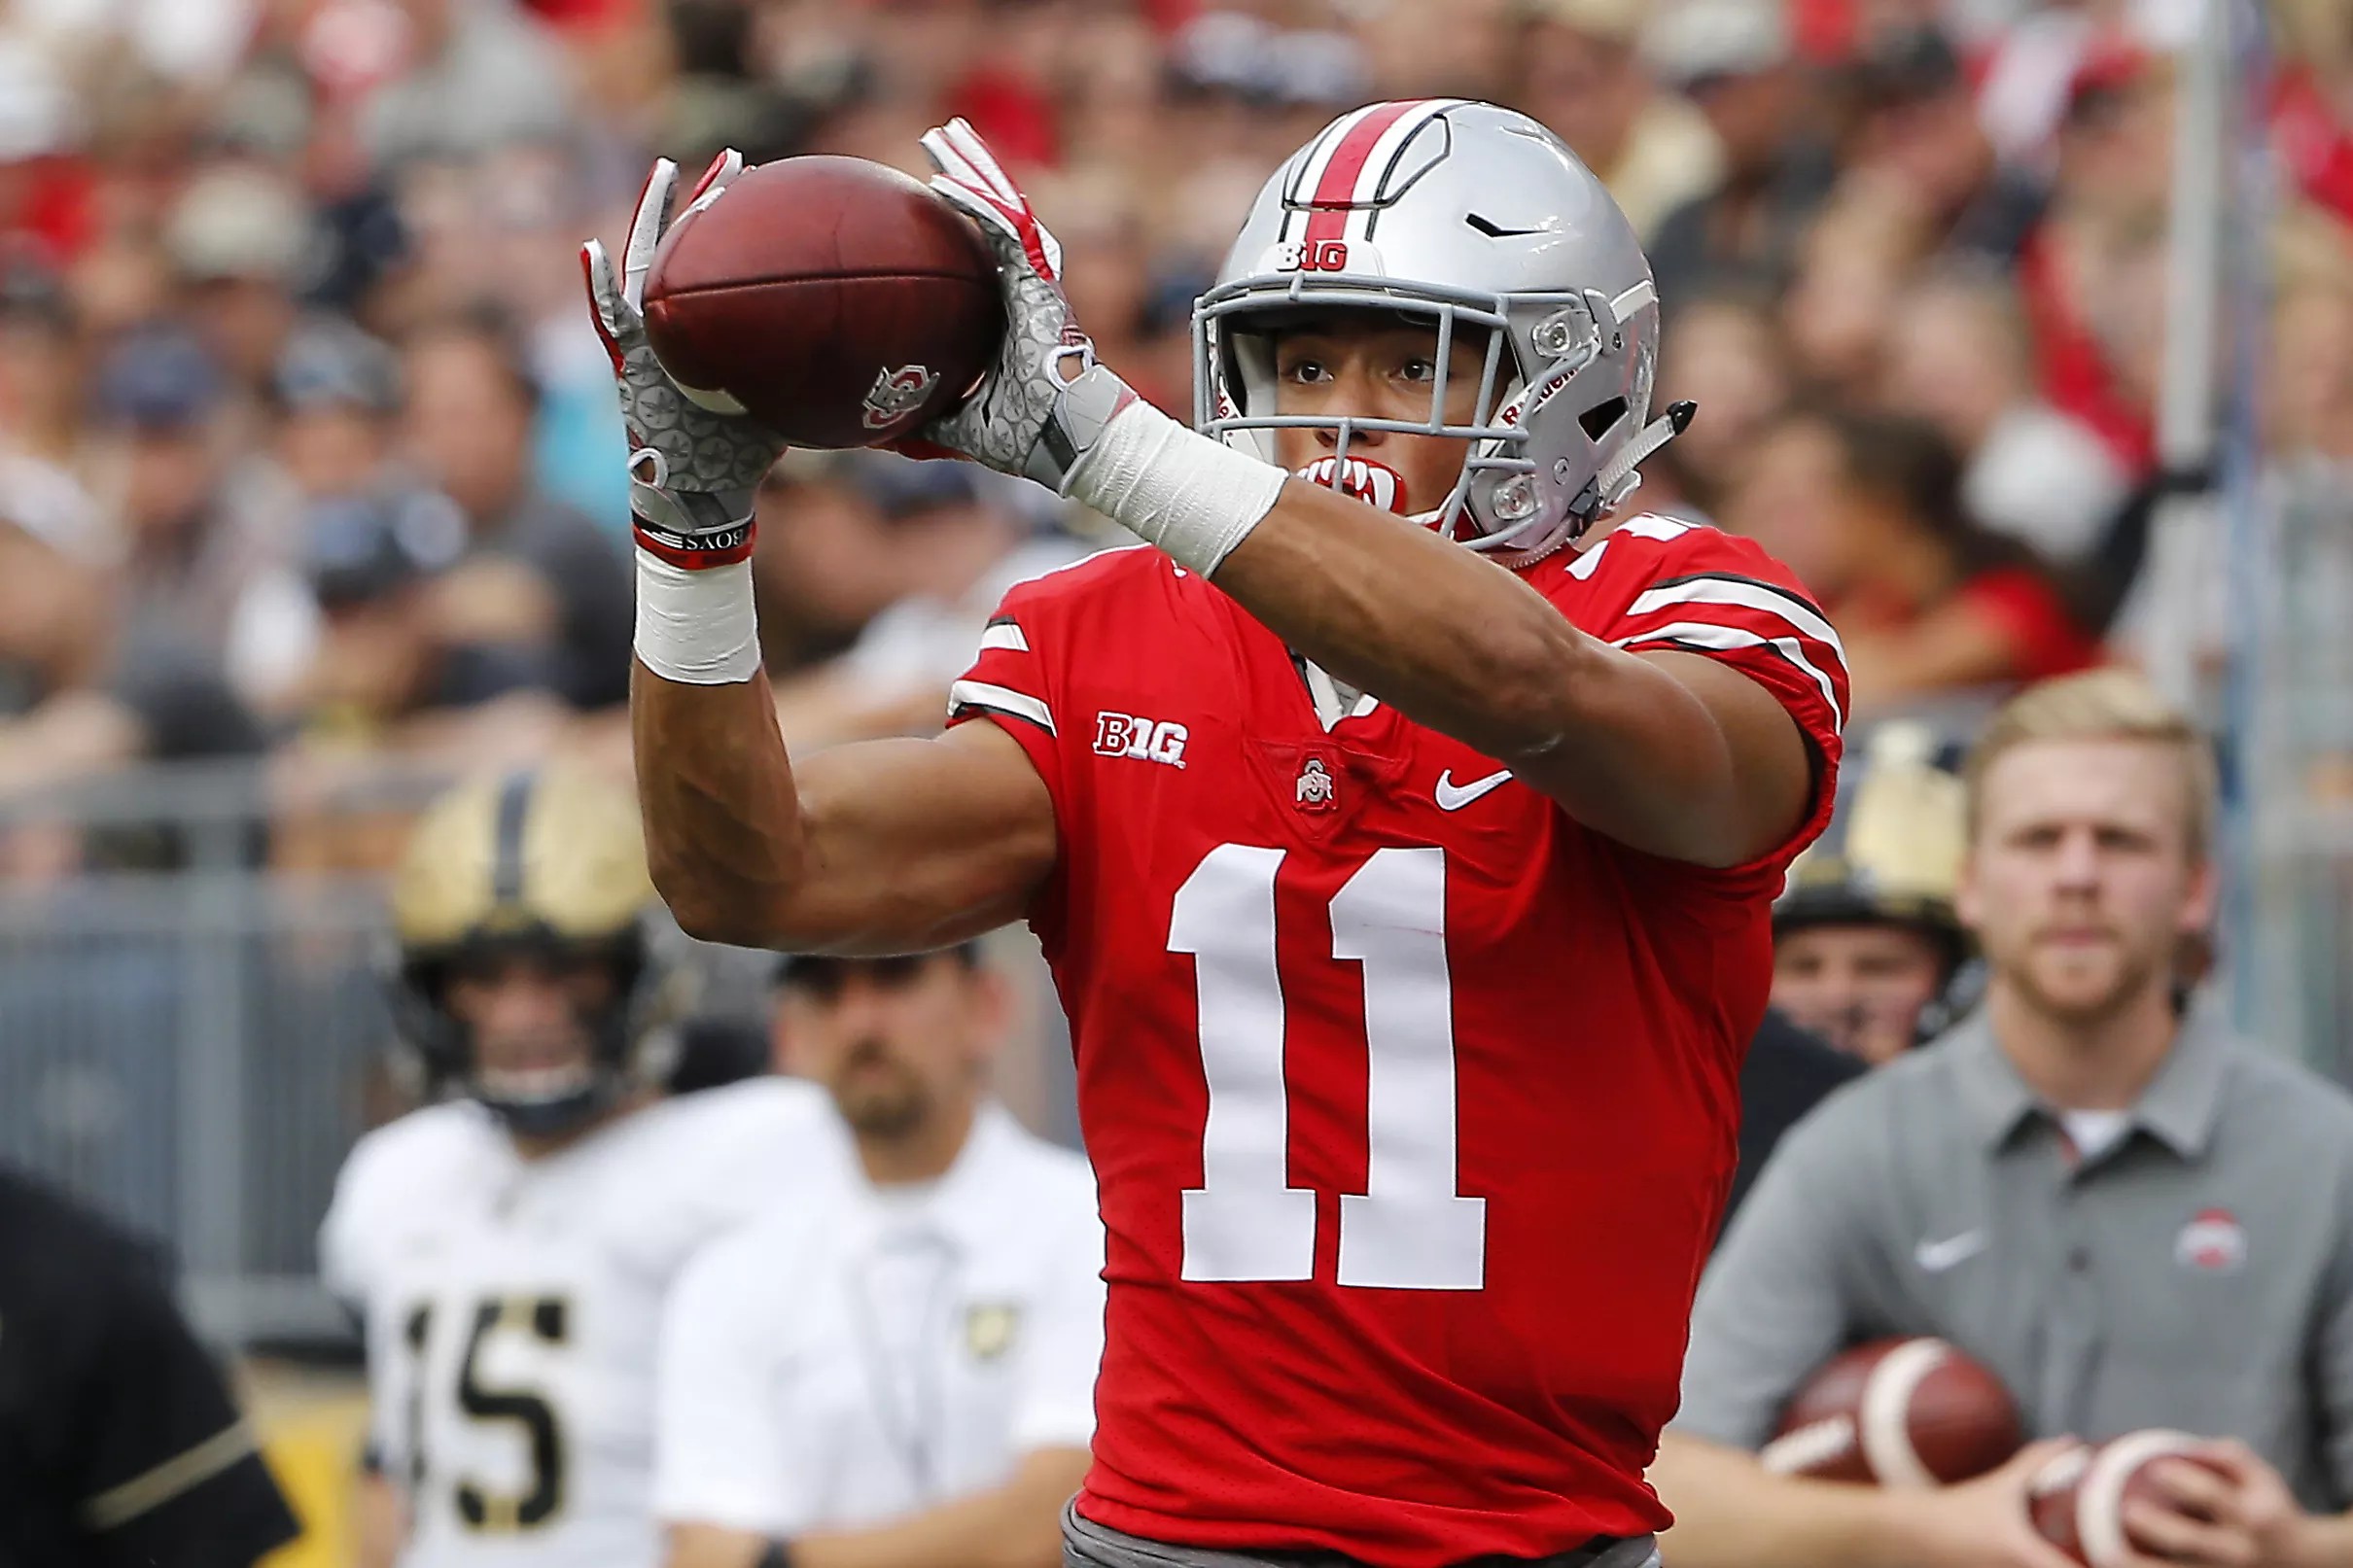 Following his first career touchdown Austin Mack could be Ohio State s